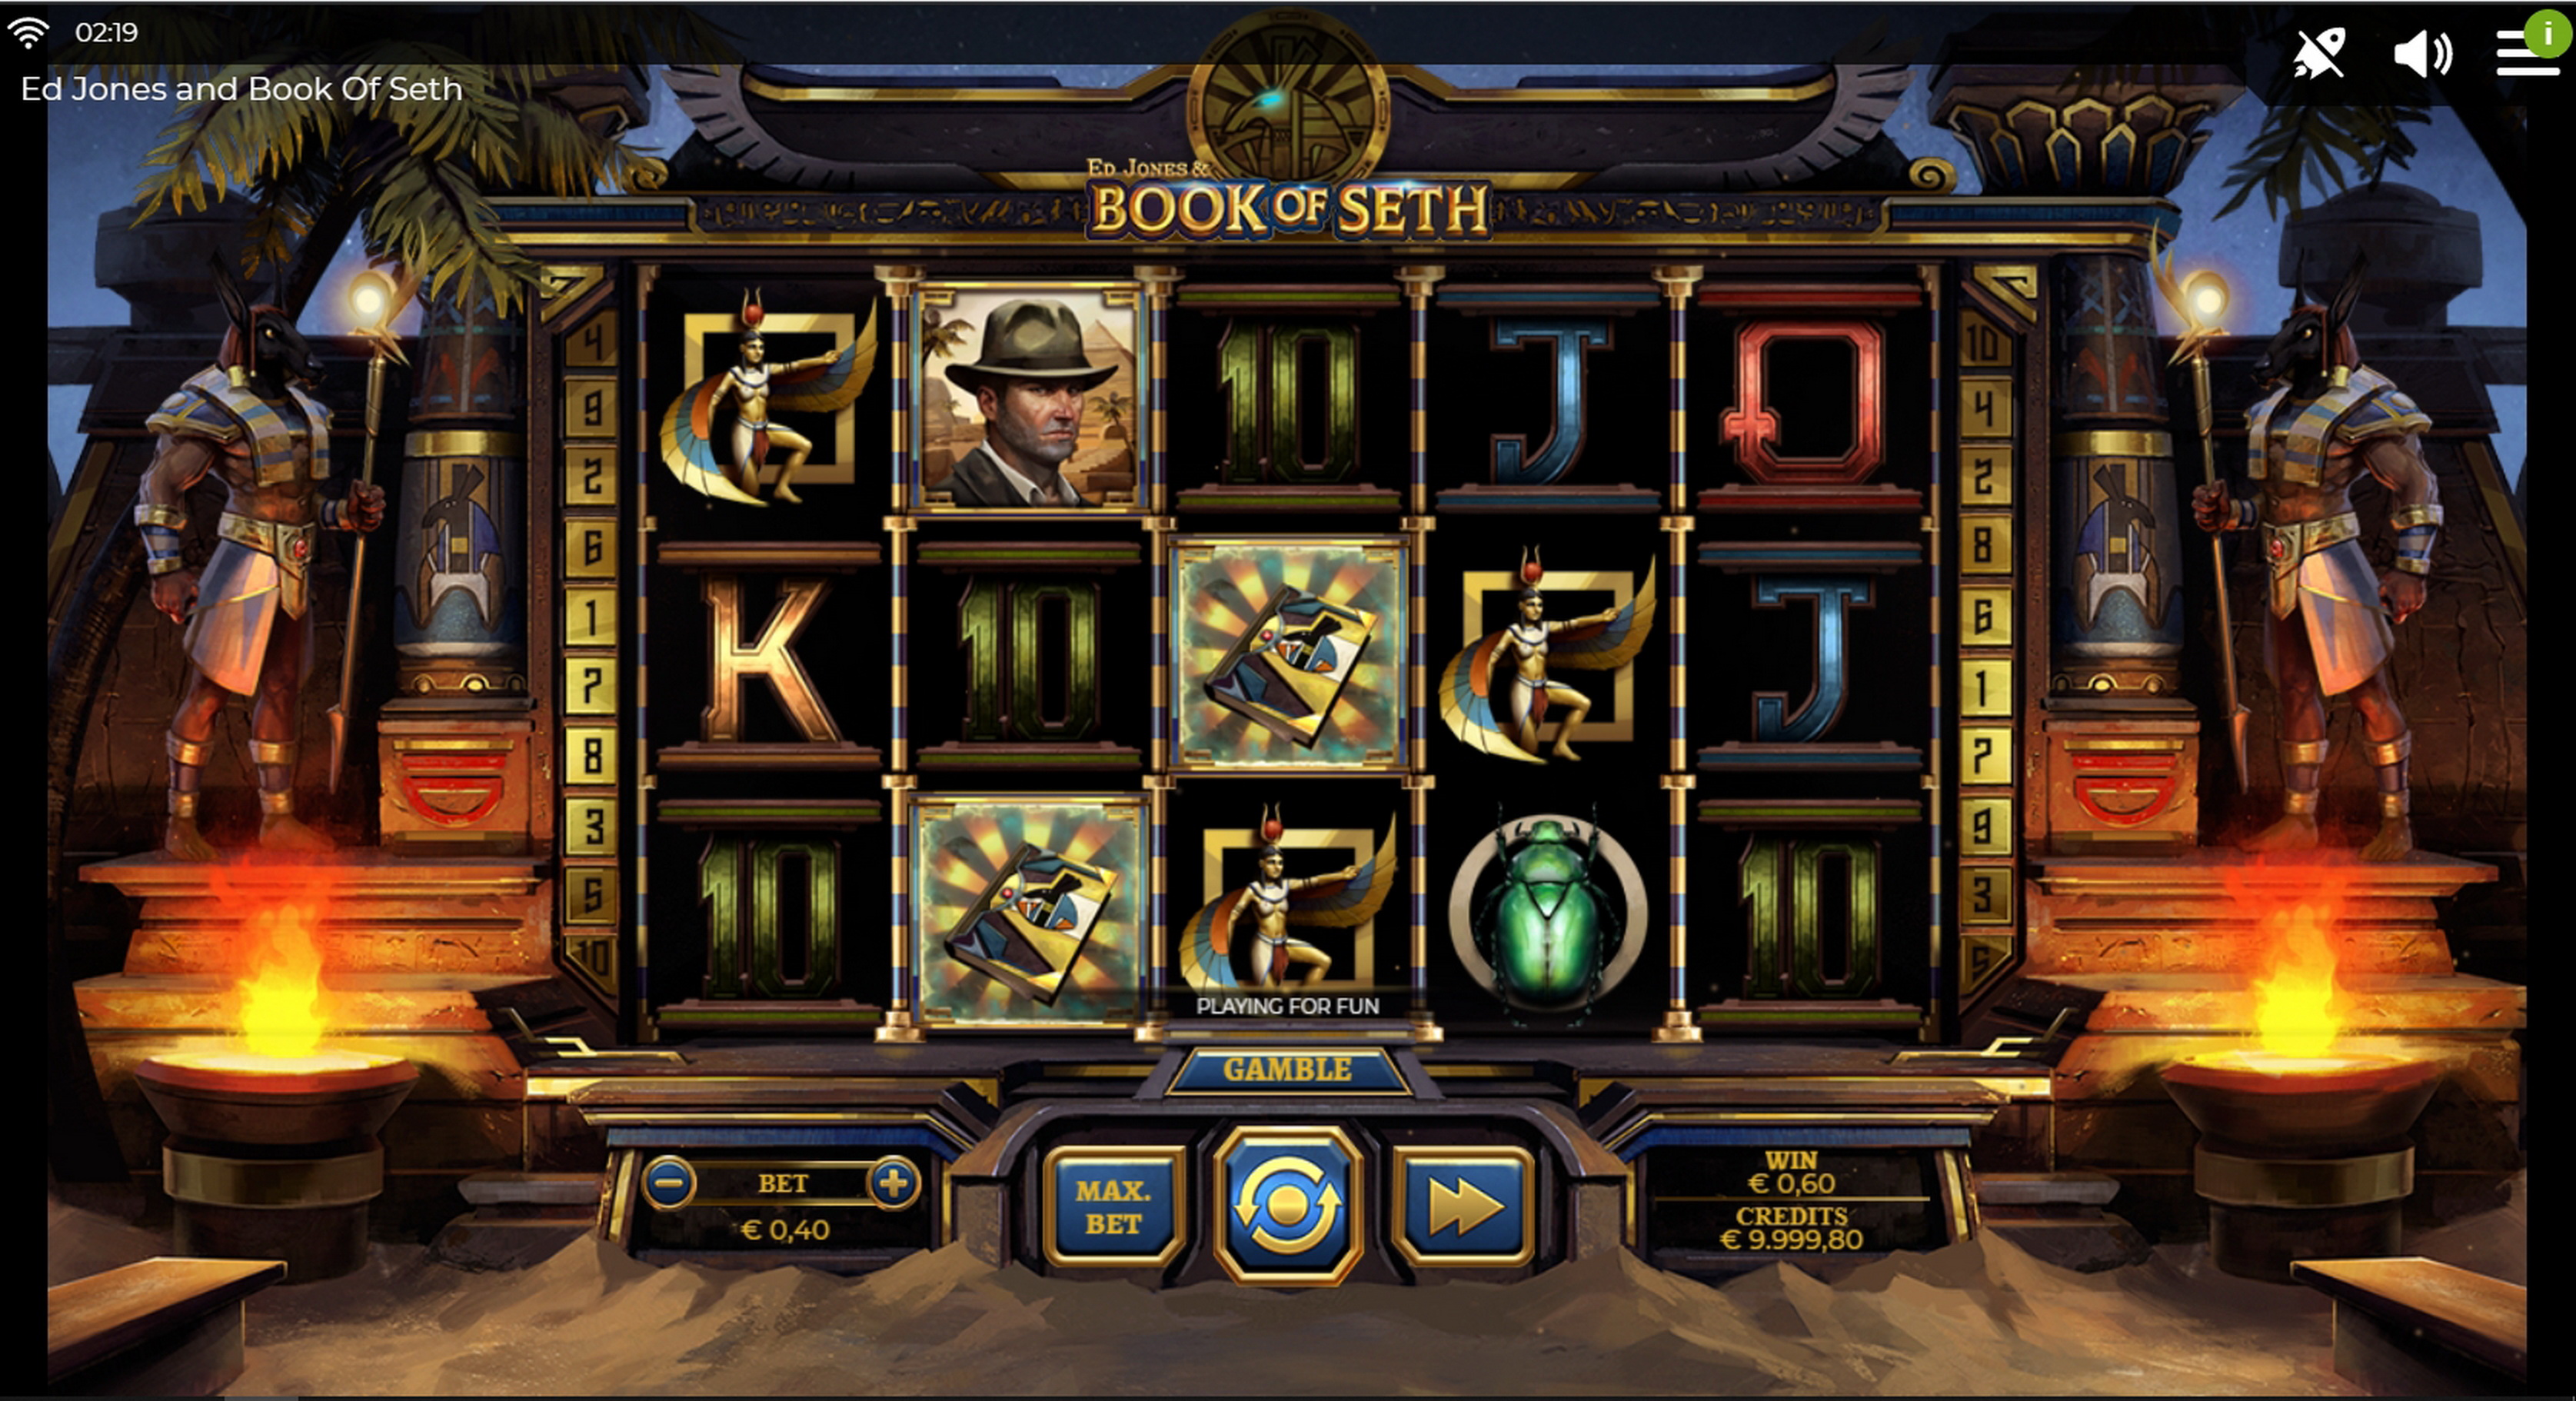 Win Money in Ed Jones & Book of Seth Free Slot Game by Spinmatic